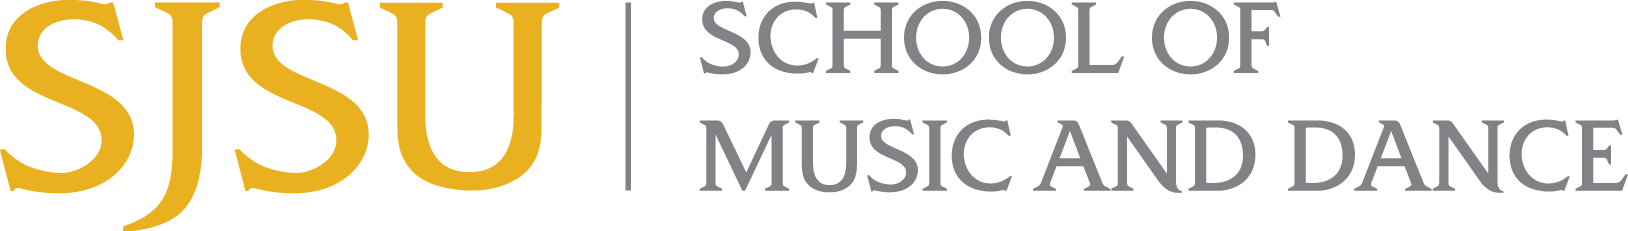 School of Music and Dance